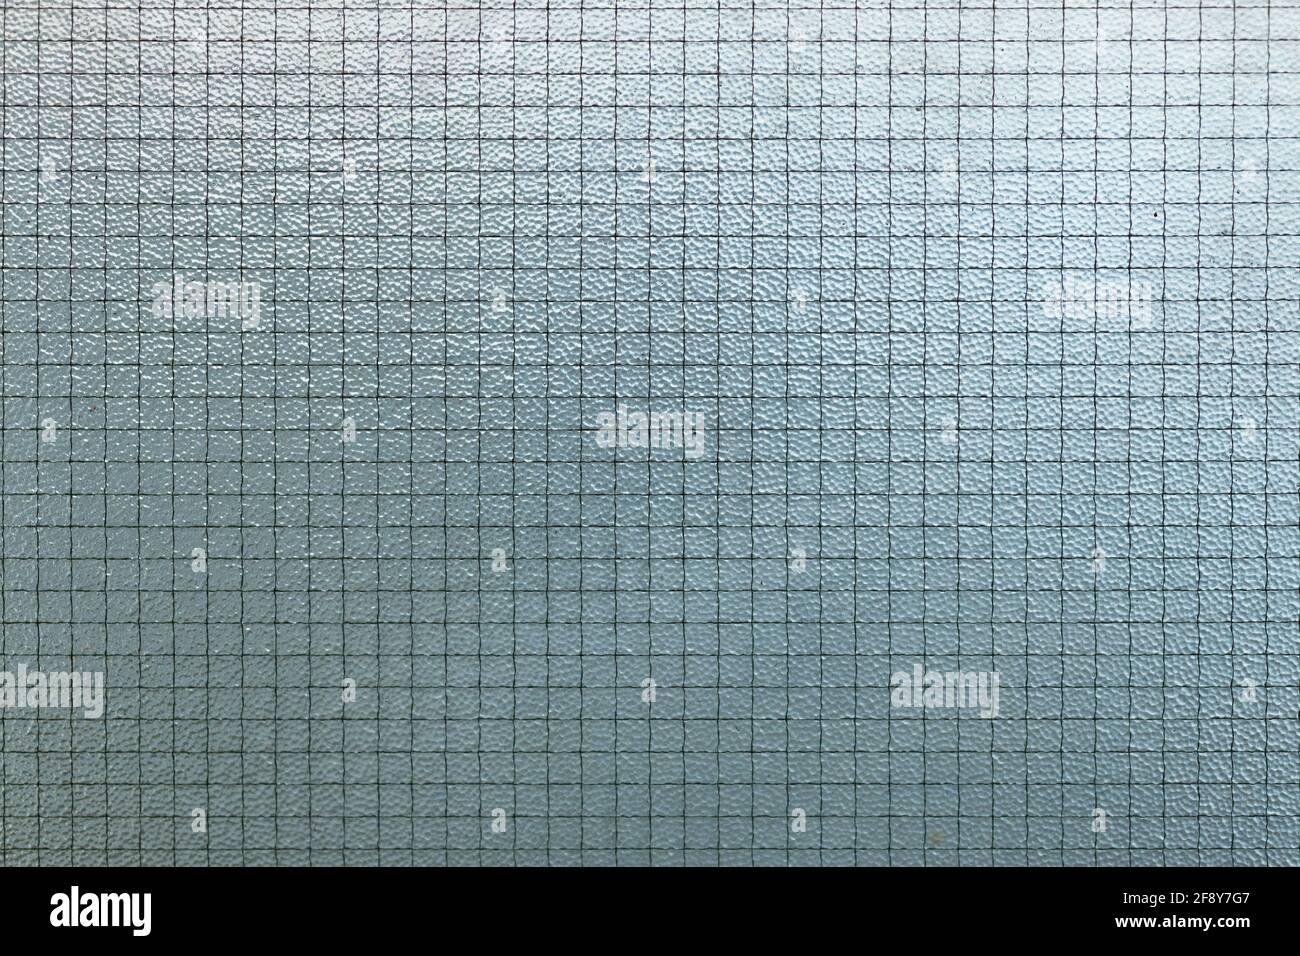 Wire mesh glass or protective safety laminated tempered glass texture pattern for background Stock Photo